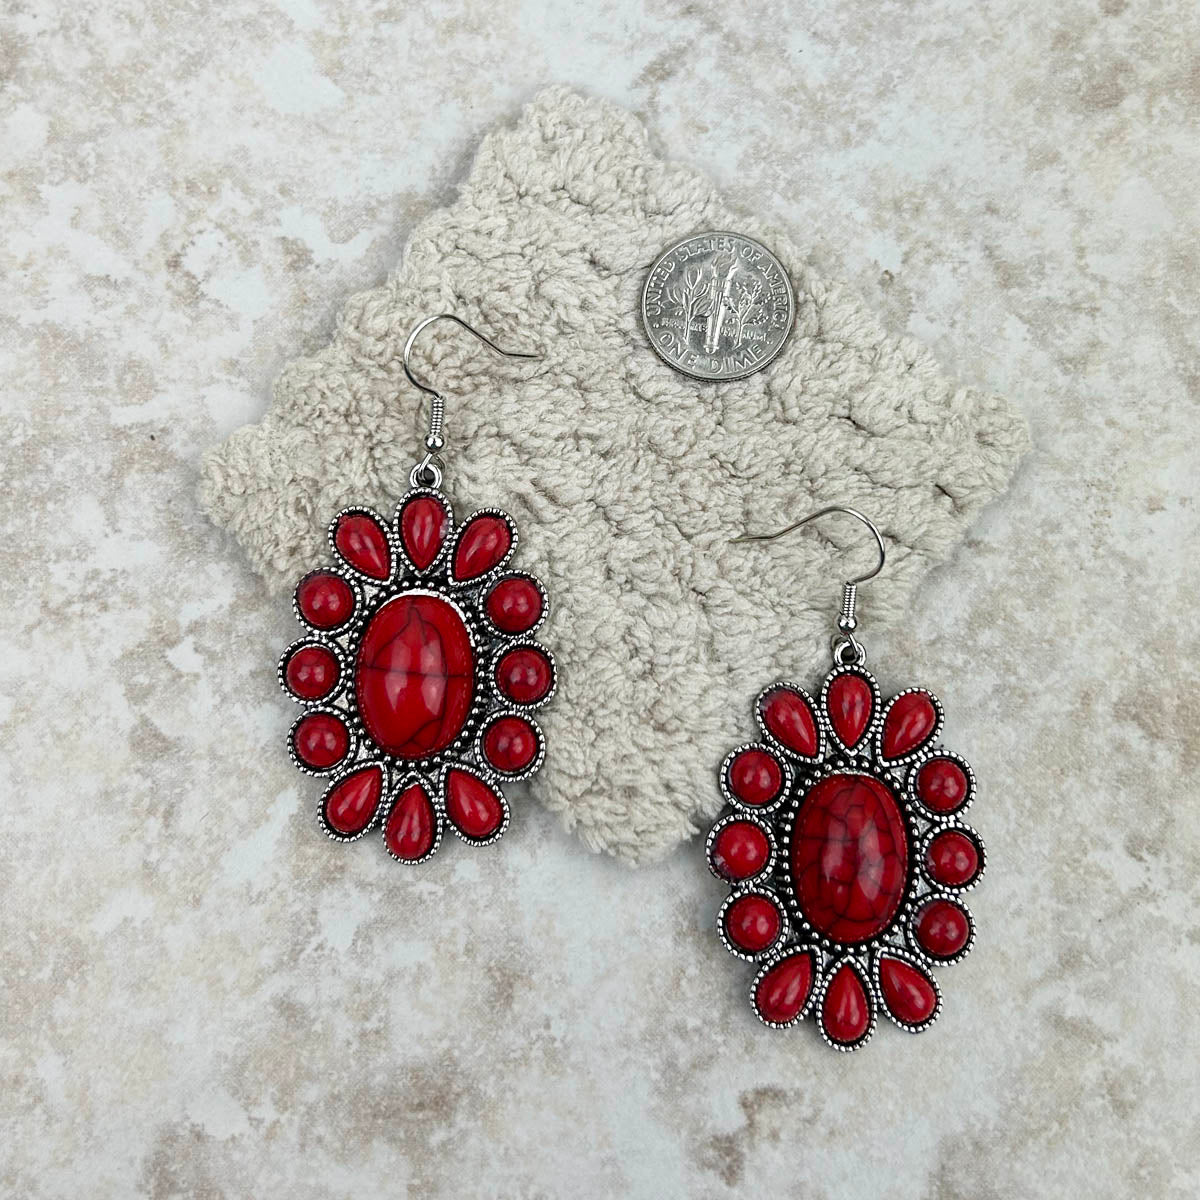 Natural Stone Oval Concho Earrings - Montana West World